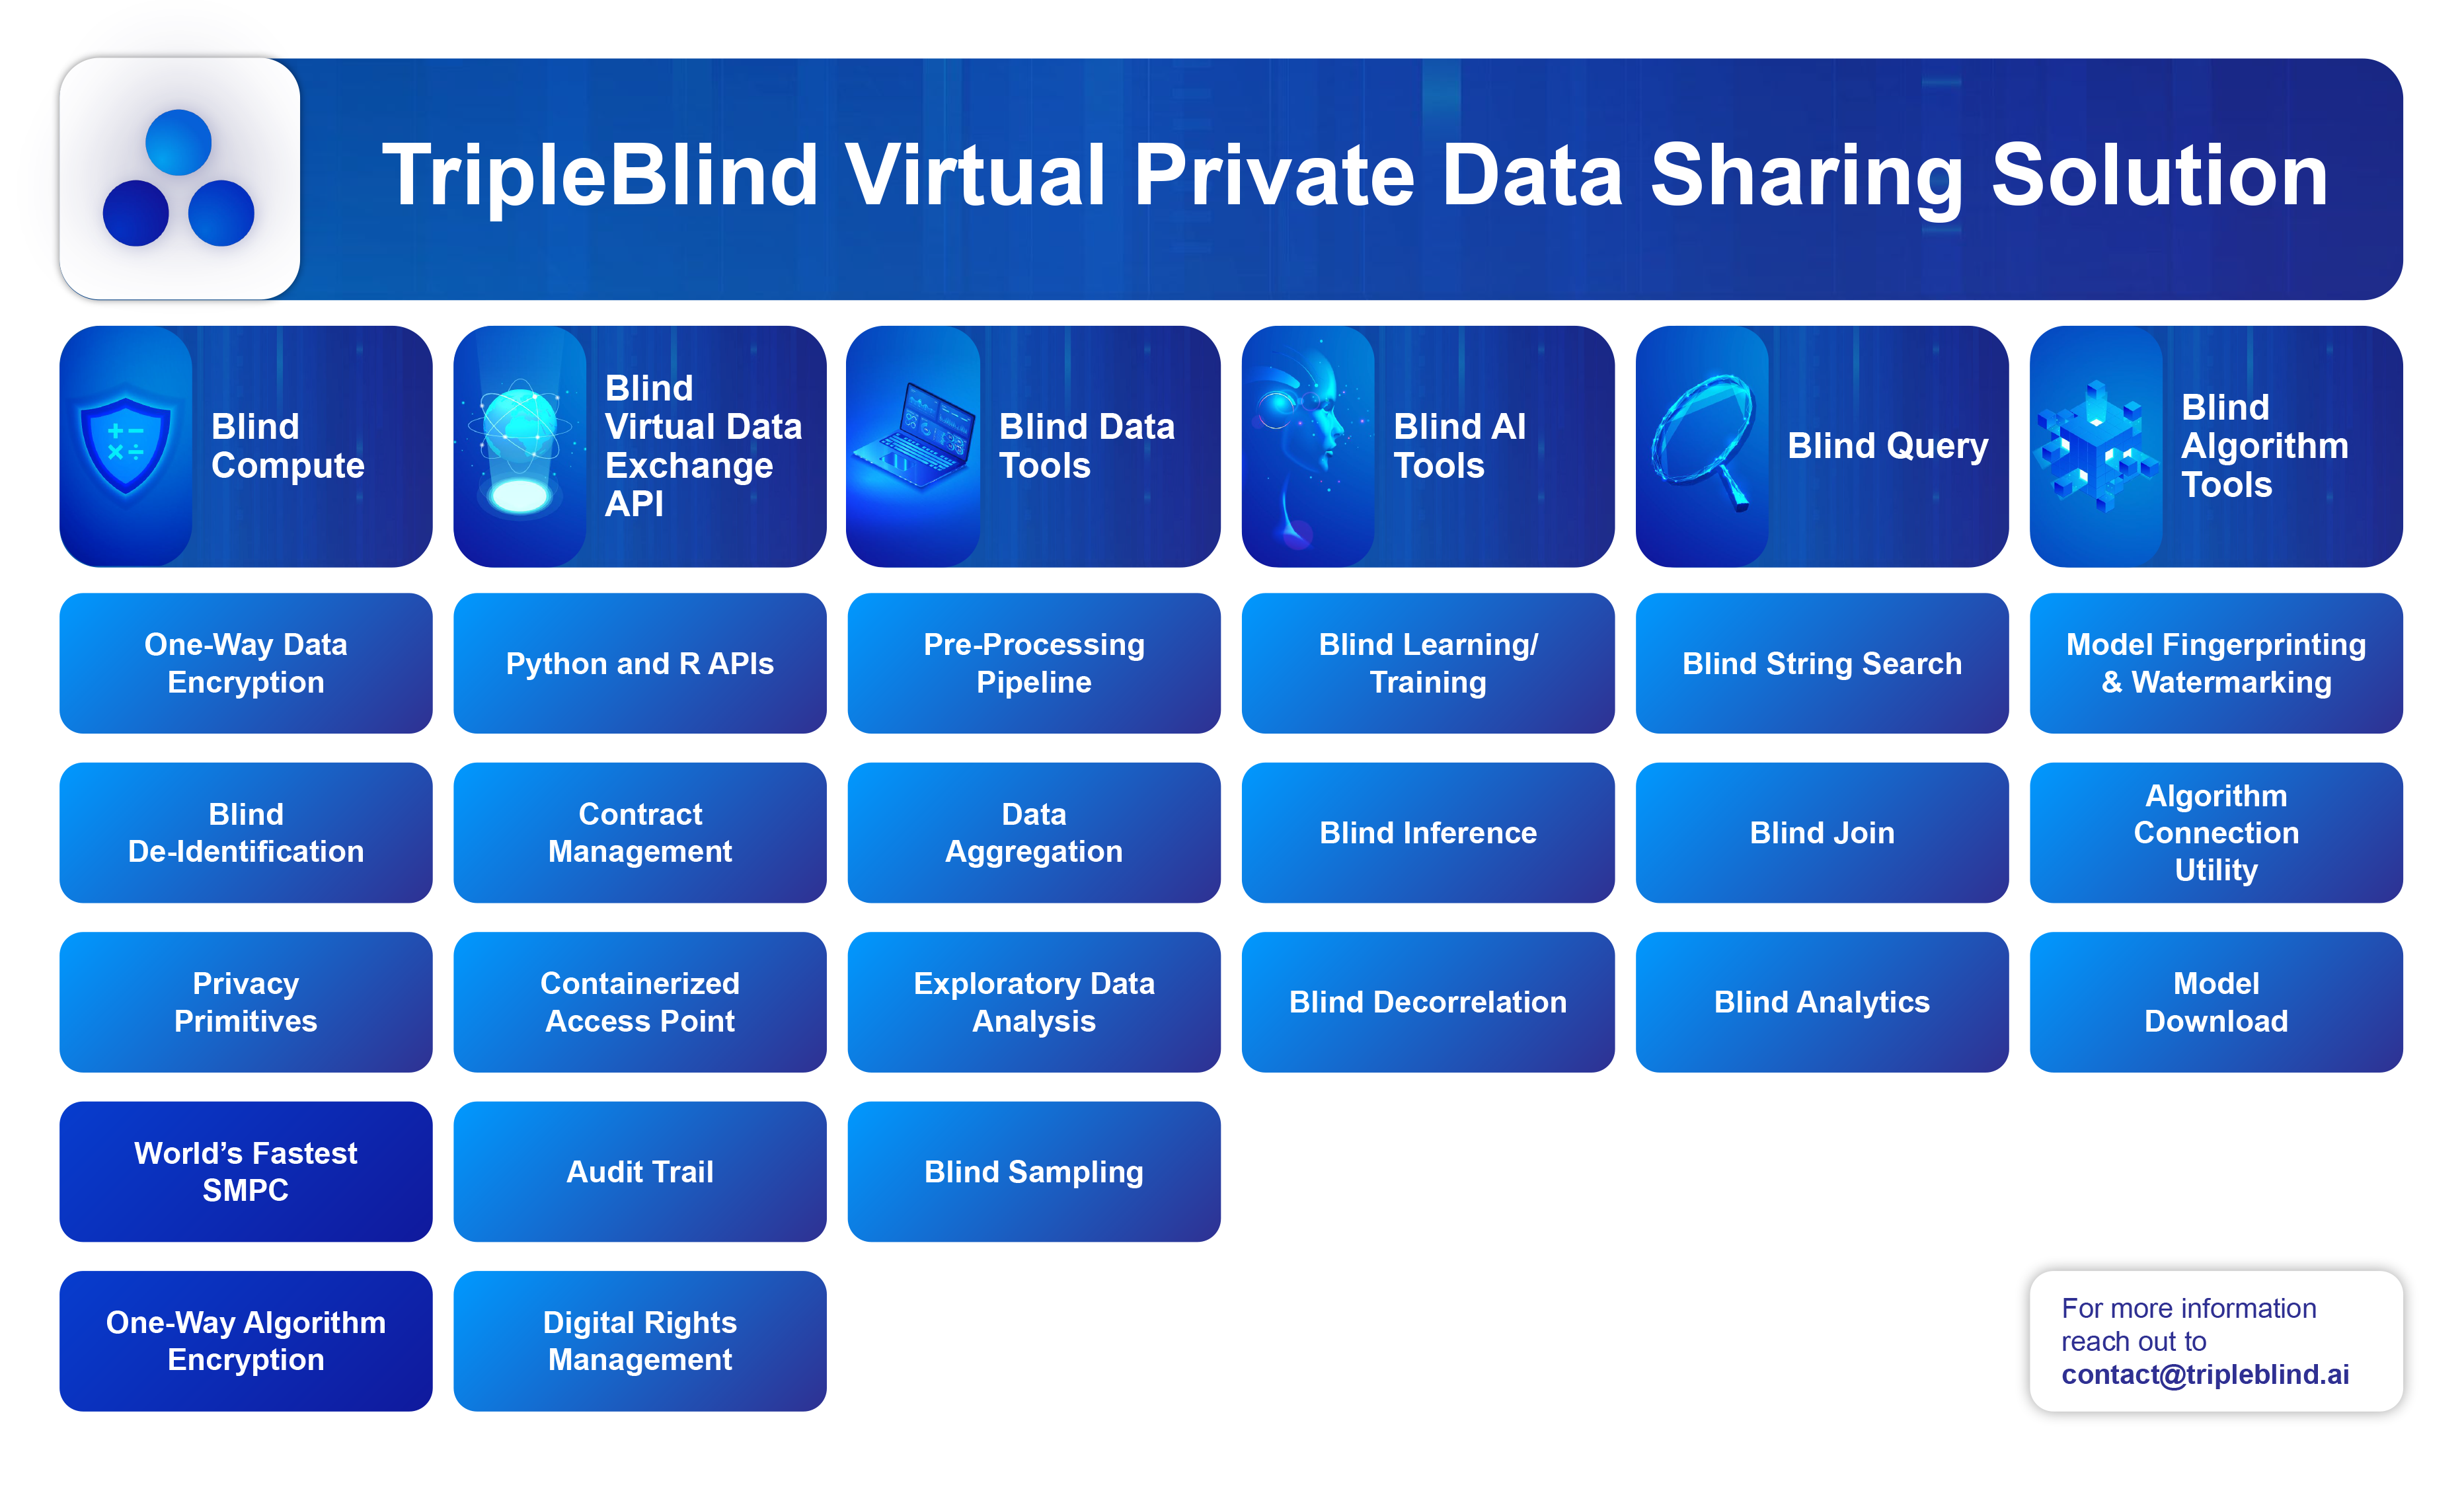 TripleBlind Virtual Private Data Sharing Solution product architecture